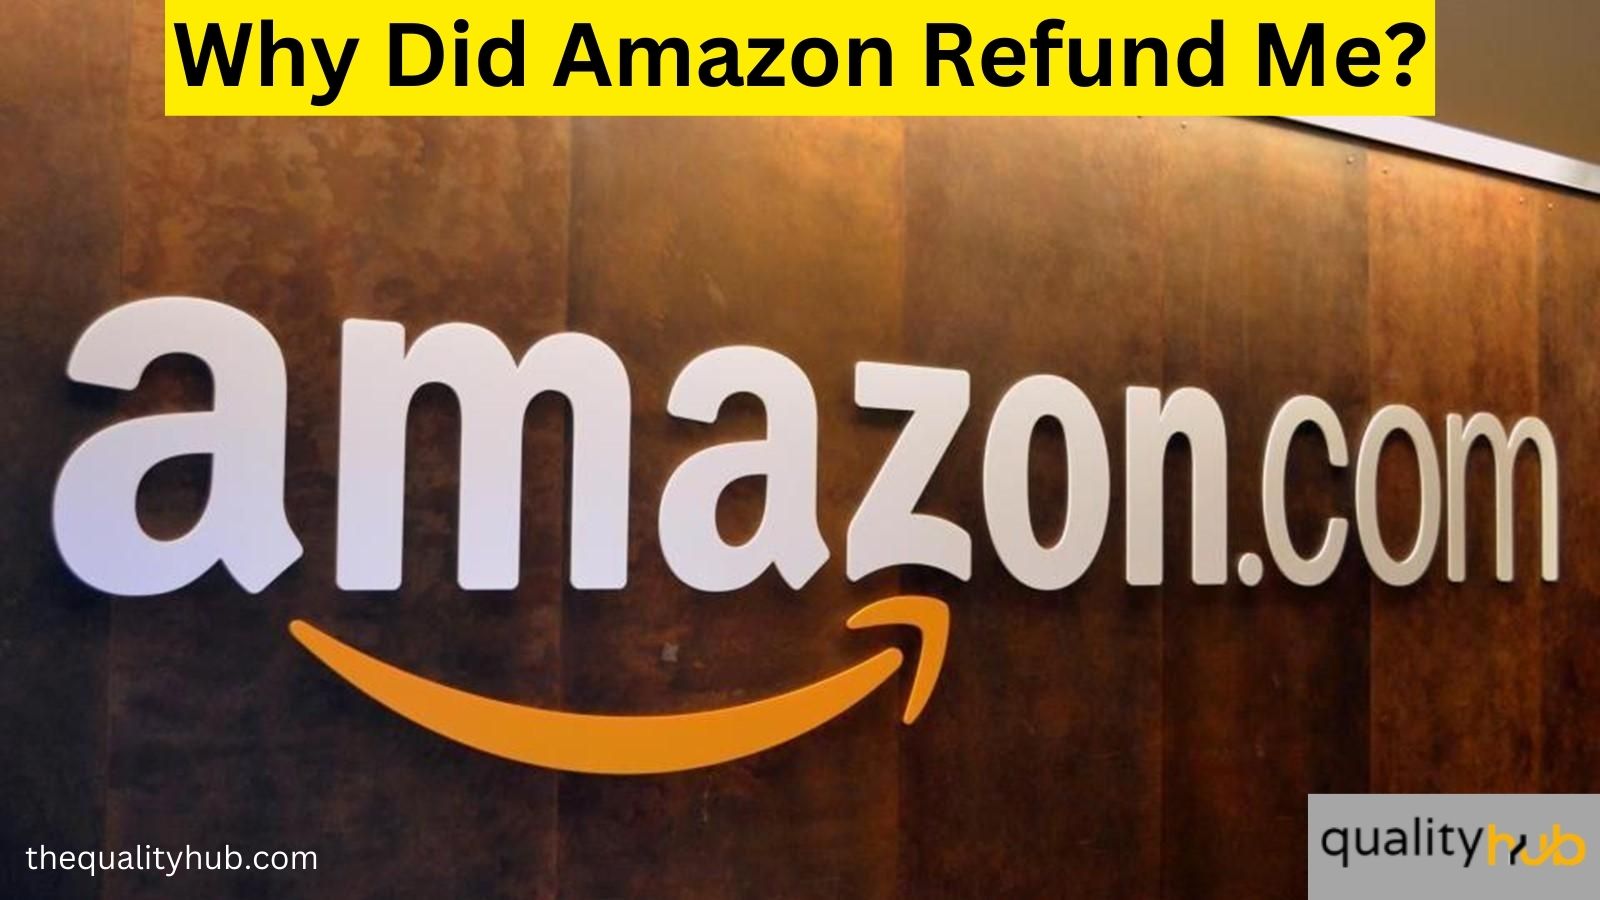 Why Did Amazon Refund Me?